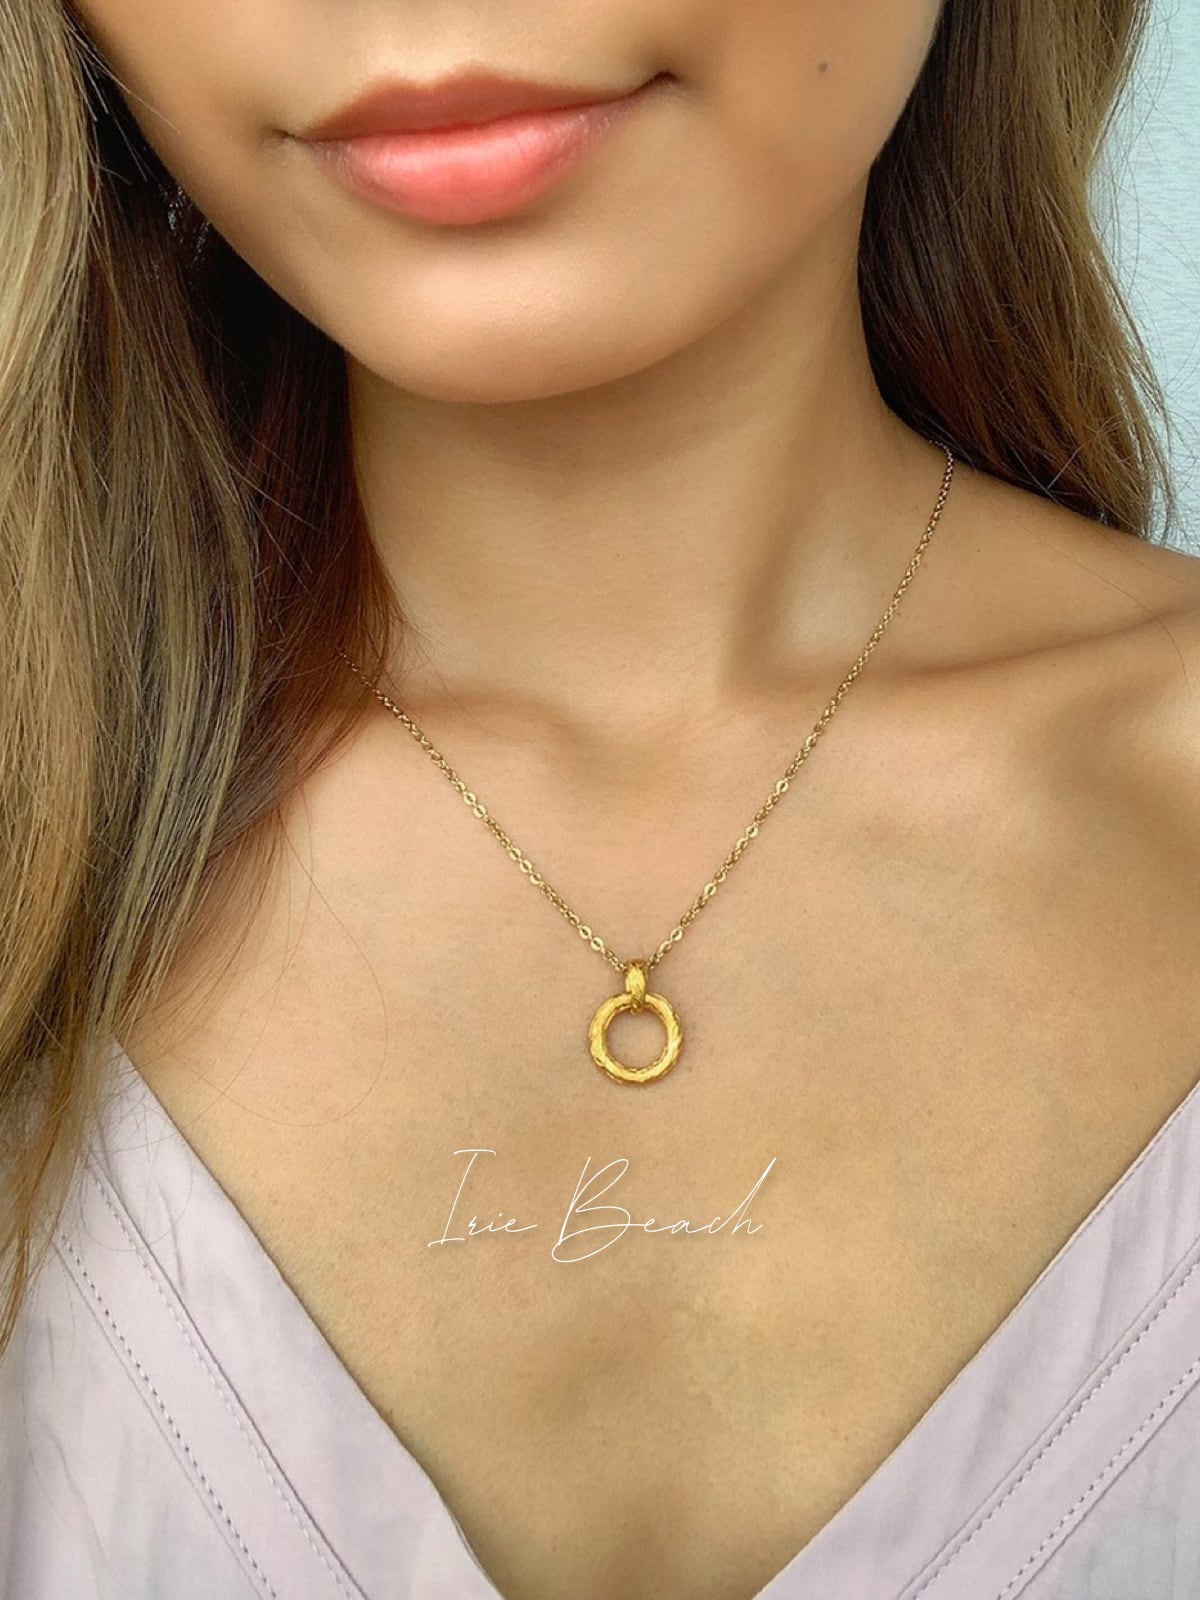 Pipe circle necklace | IRIEBEACH powered by BASE